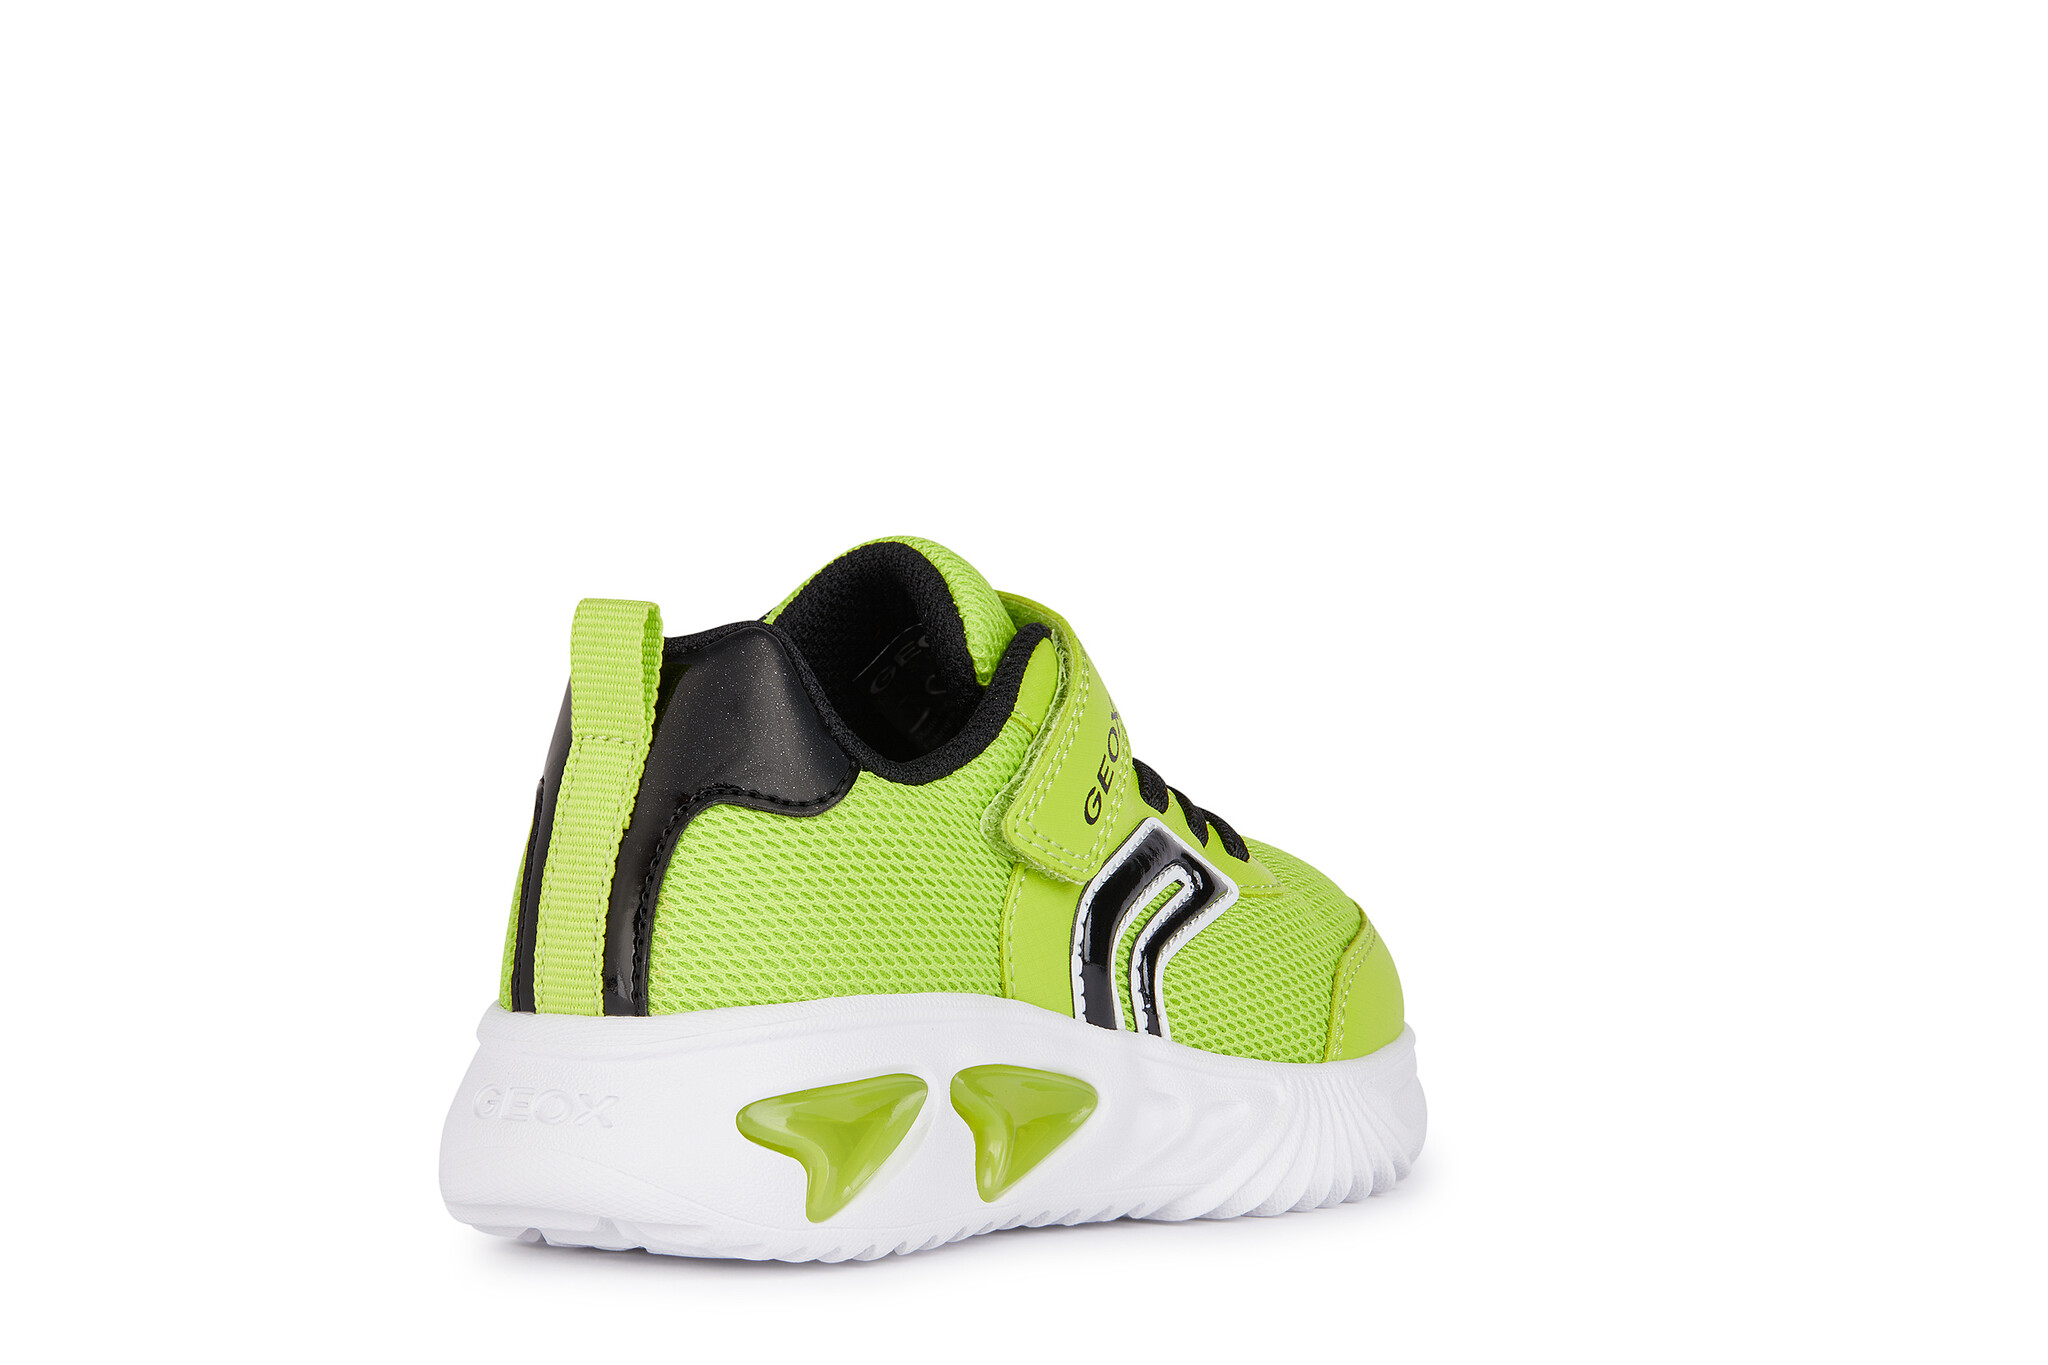 Geox Assister Lime/Black